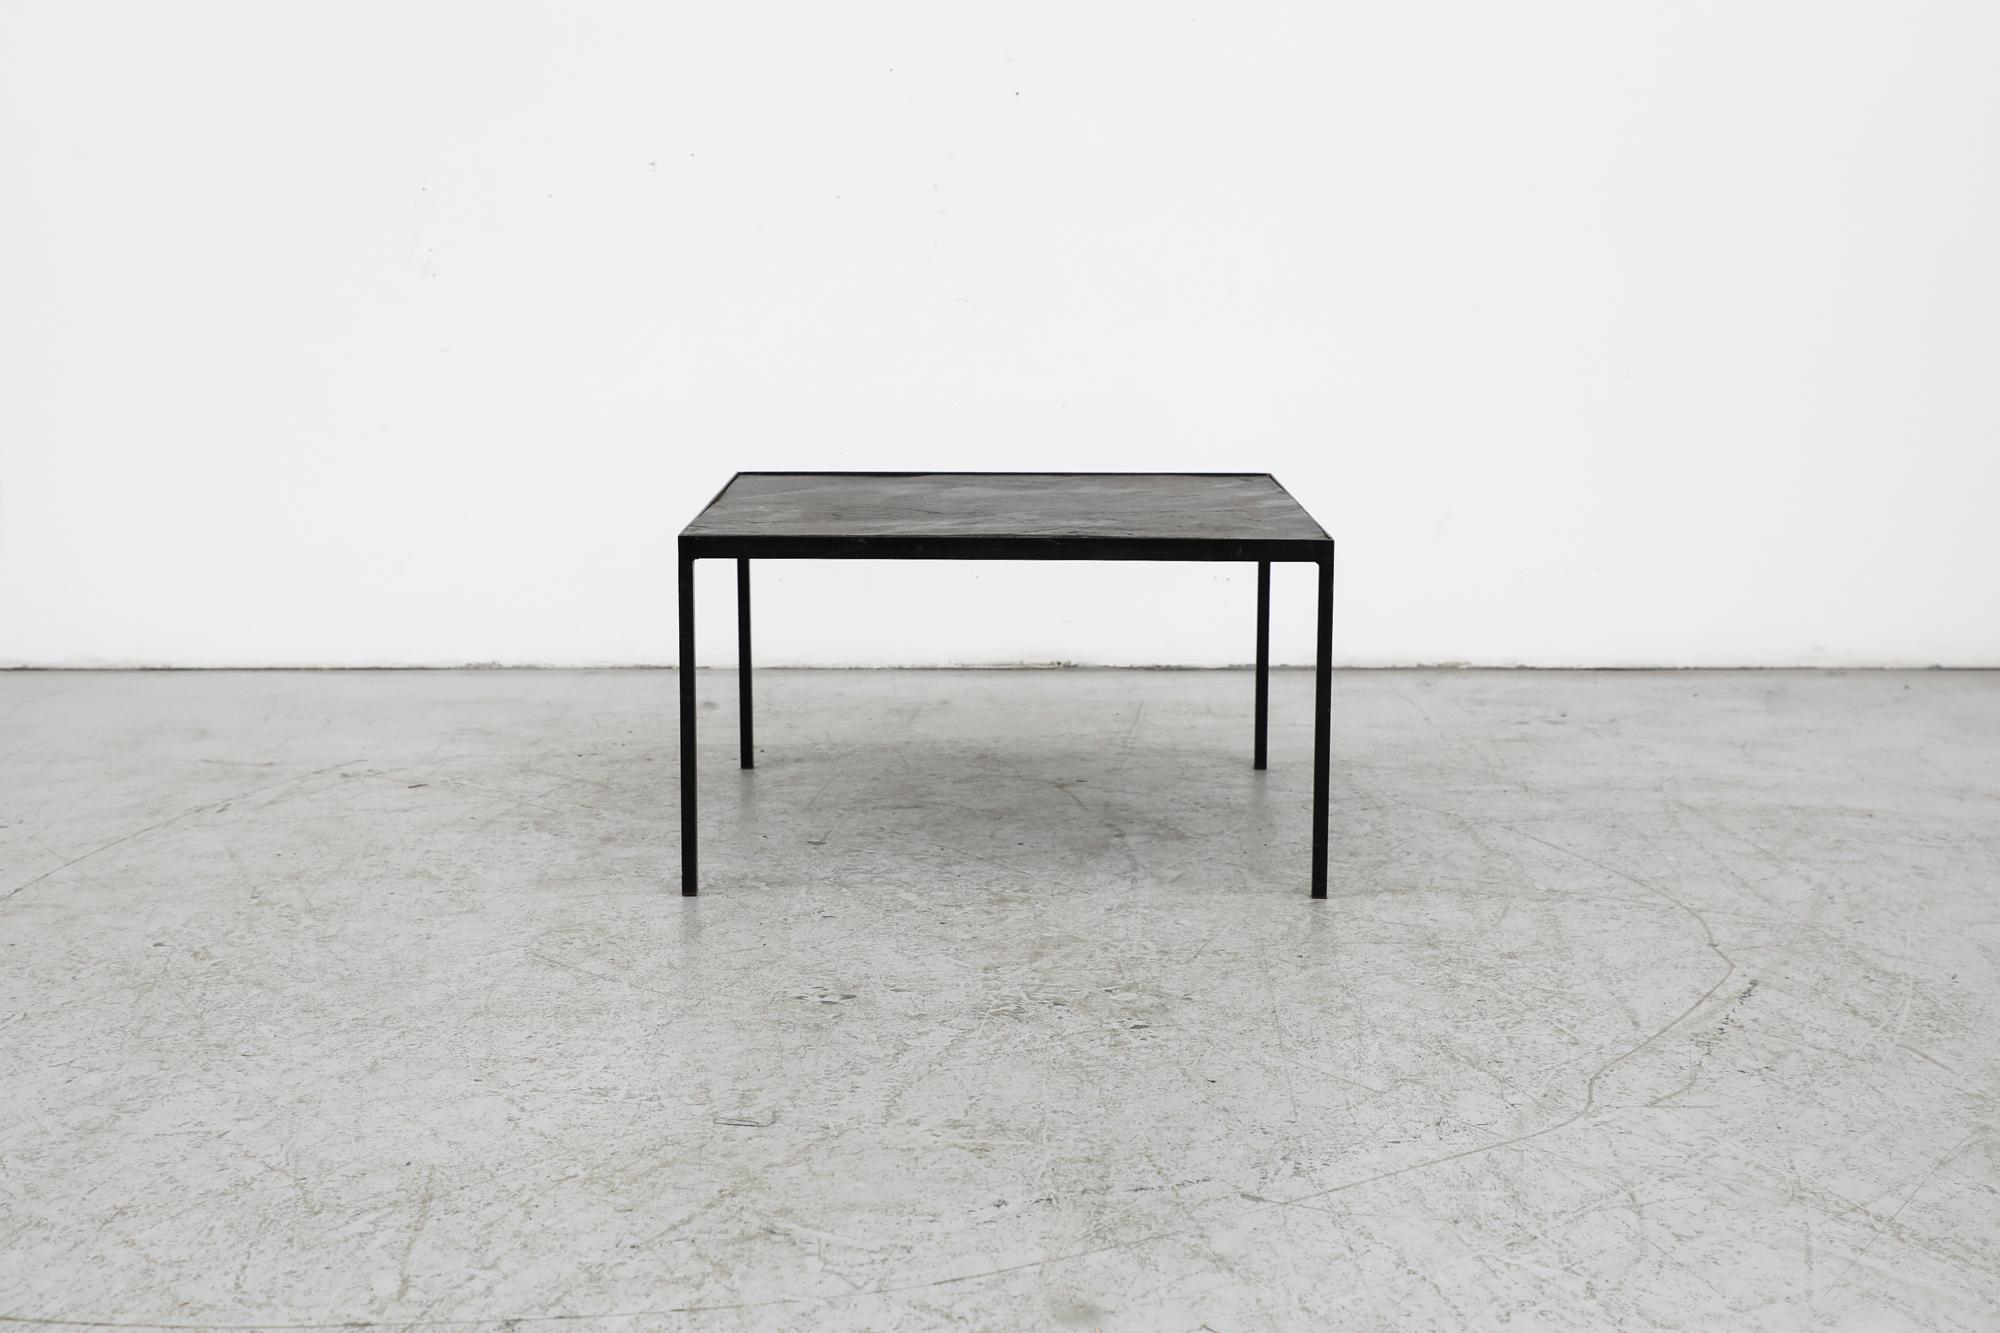 Mid-Century Artimeta Style Inset Square Slate Stone Coffee Table with Back Enameled Metal Frame. In original condition with visible wear including chipping and scratching. Wear is consistent with its age and use.